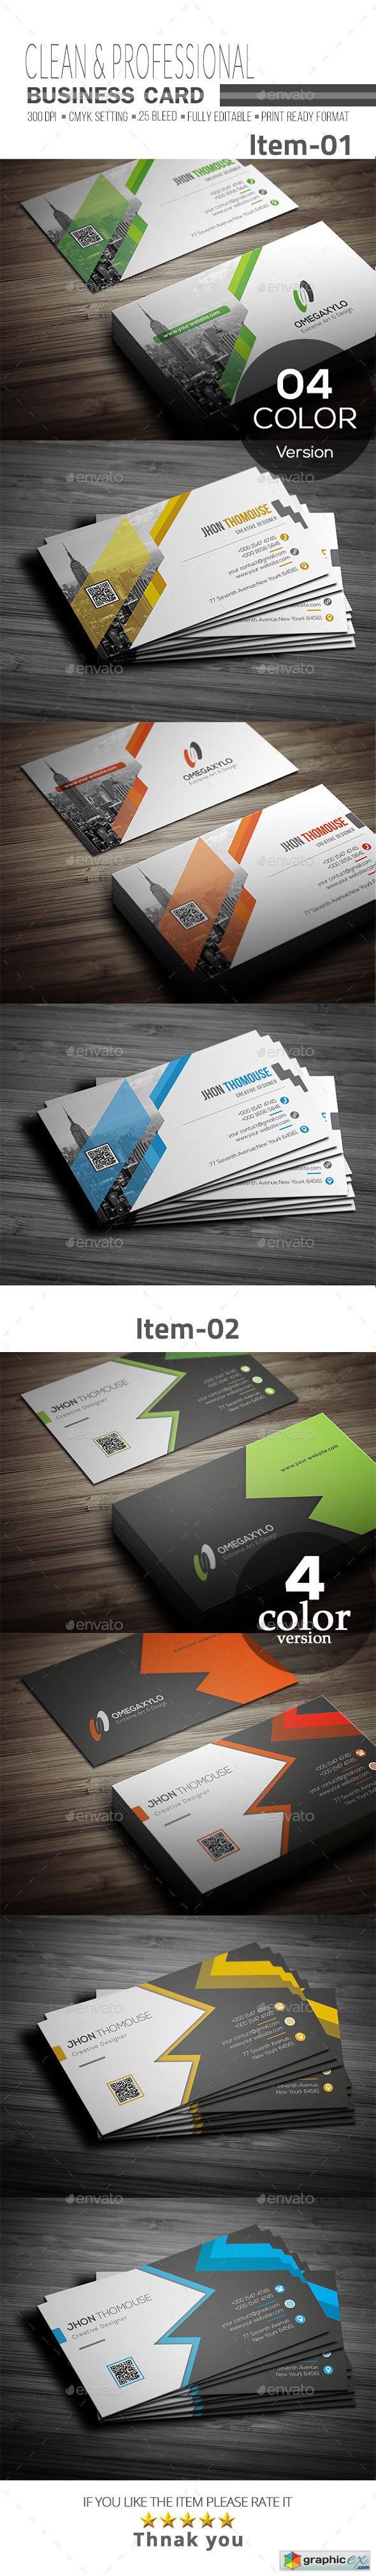 Business Card Bundle 2 In 1 20712119